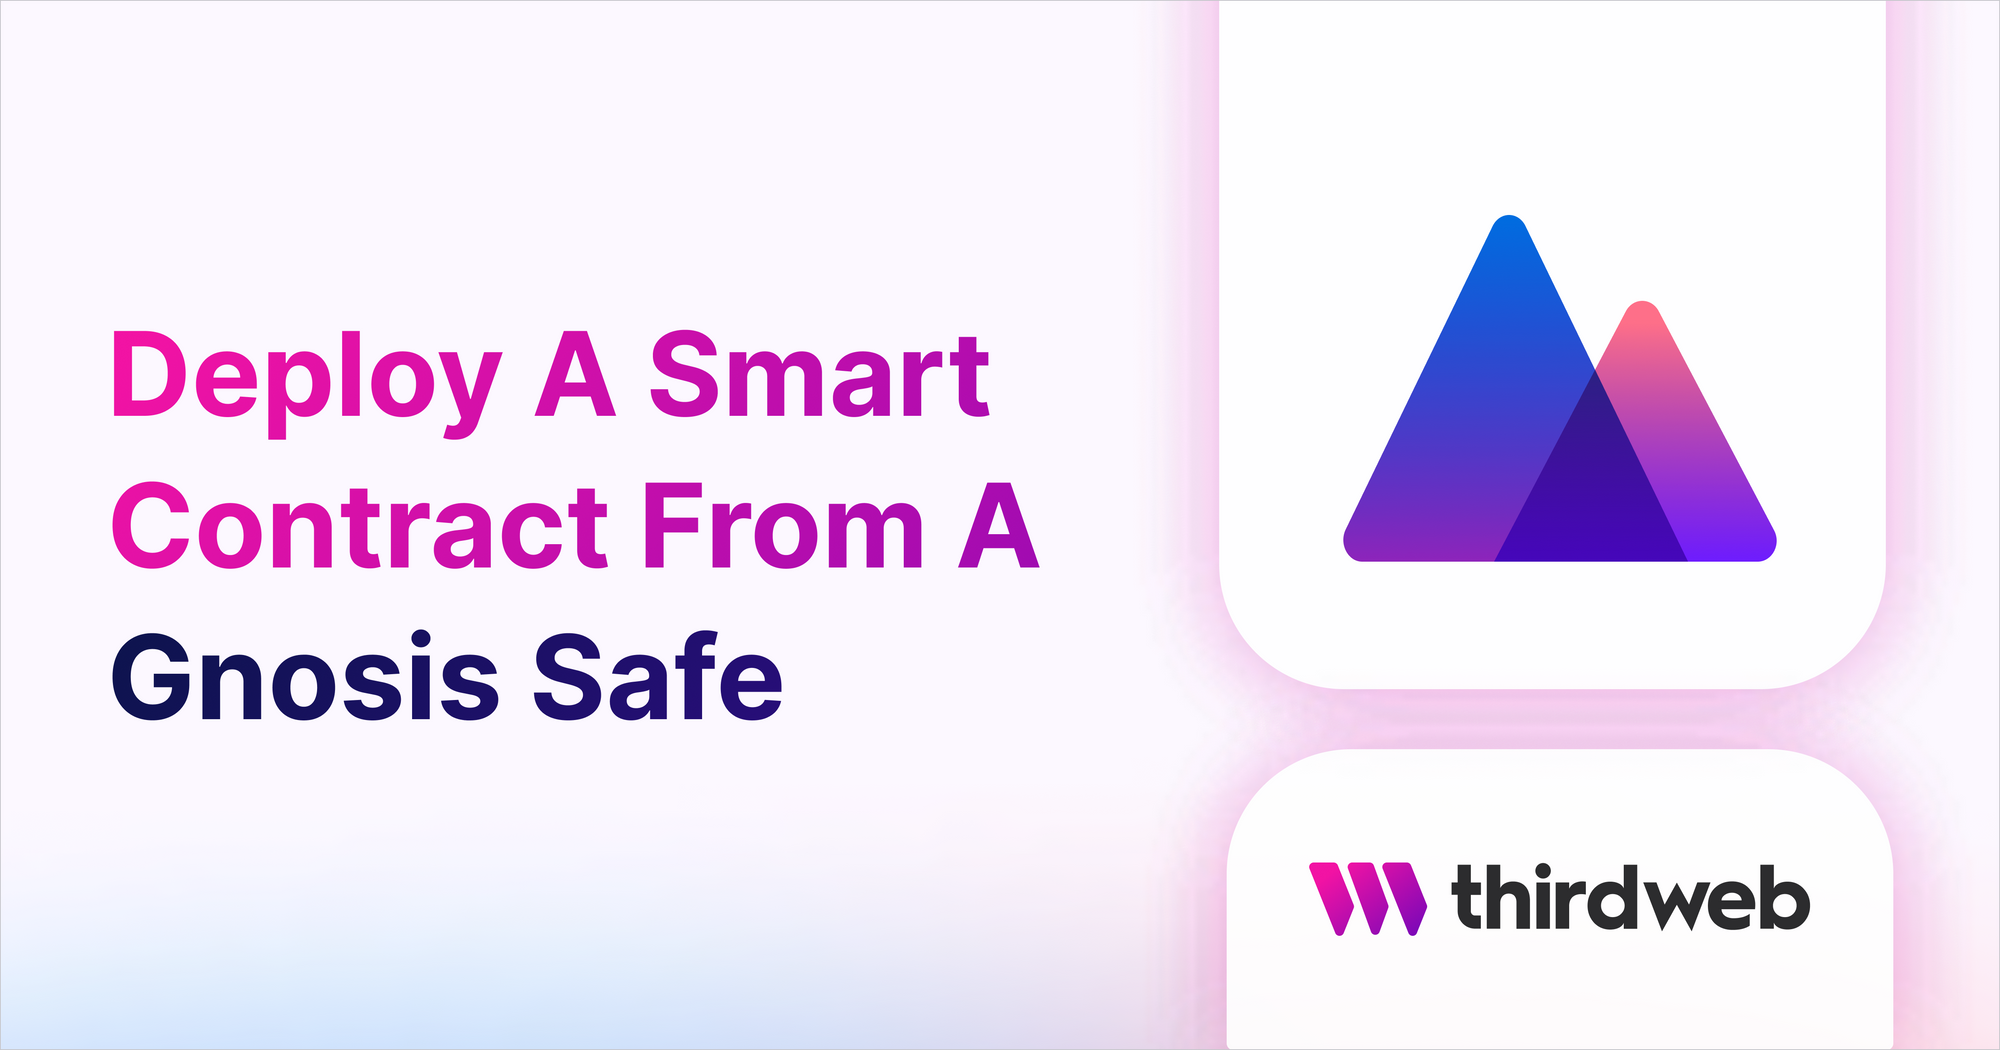 Deploy Smart Contracts From A Gnosis Safe